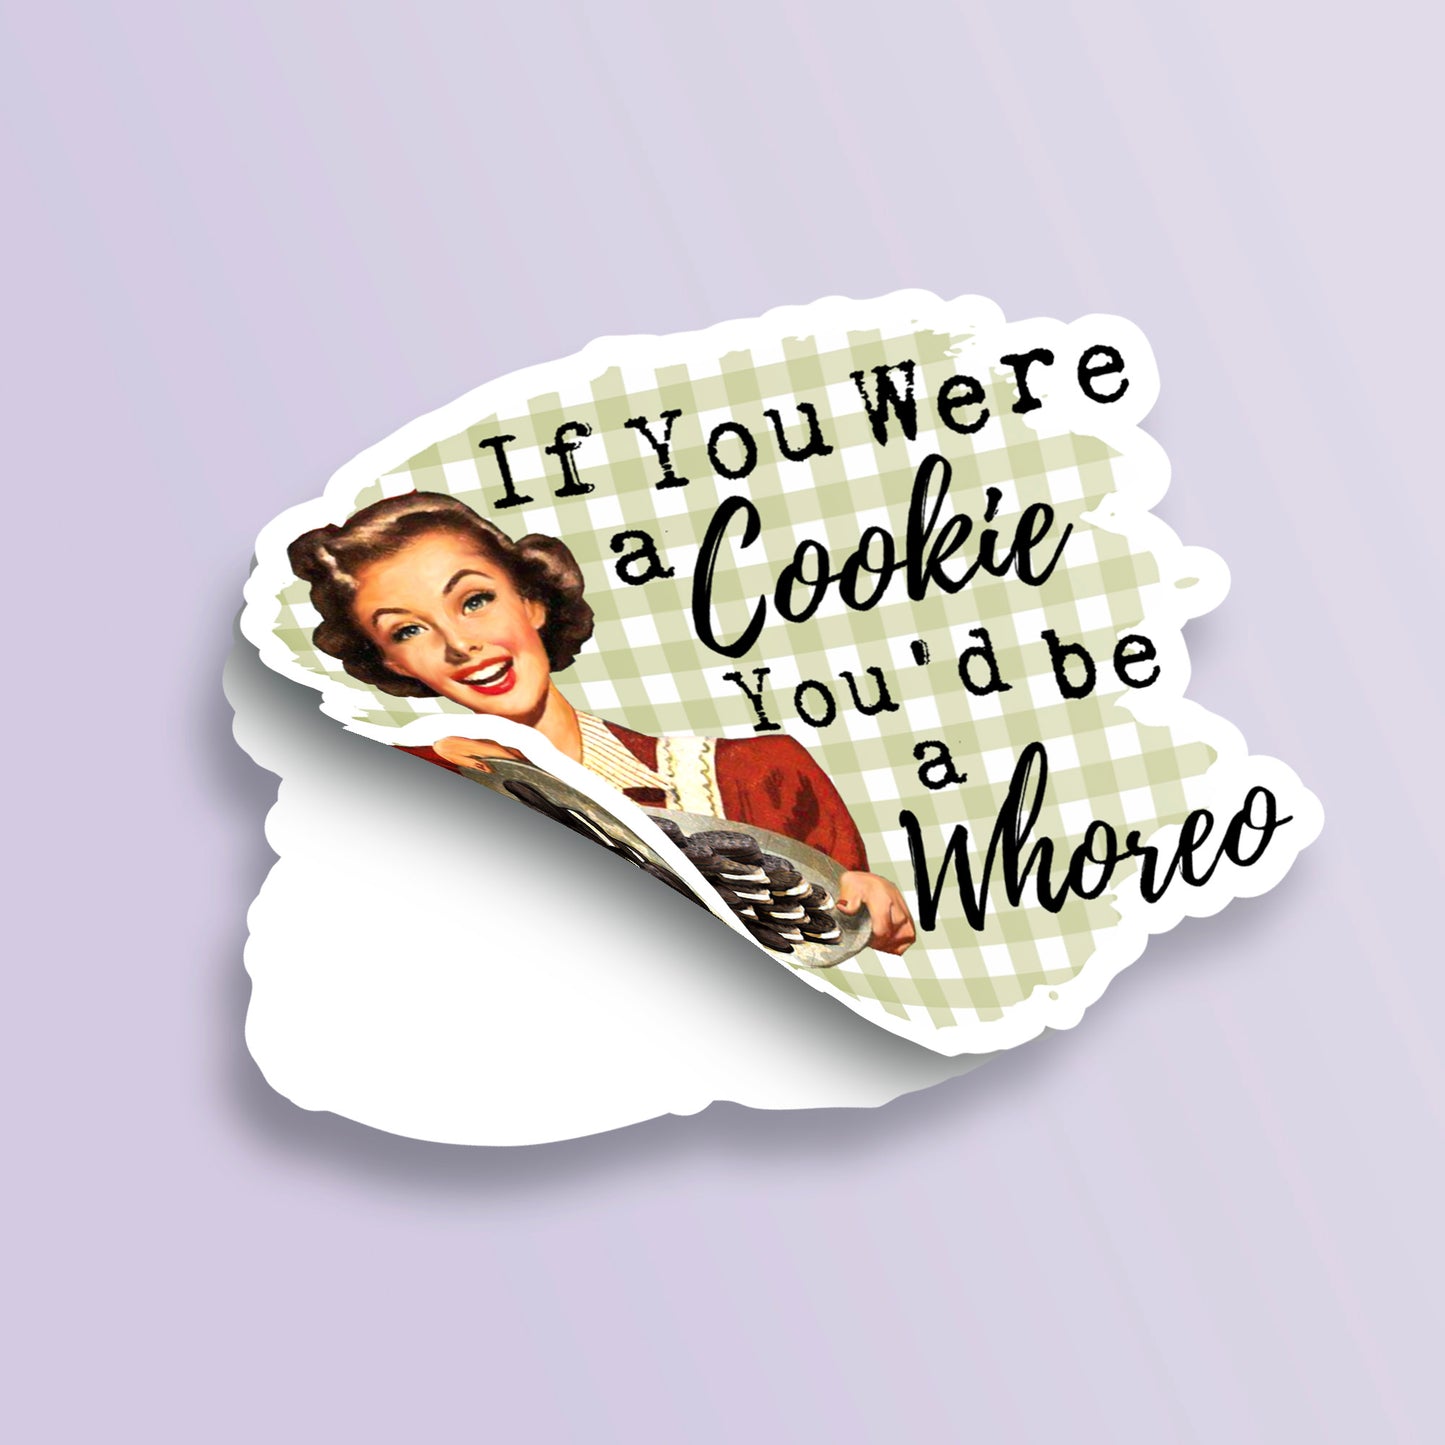 If You Were A Cookie You'd Be A Whoreo